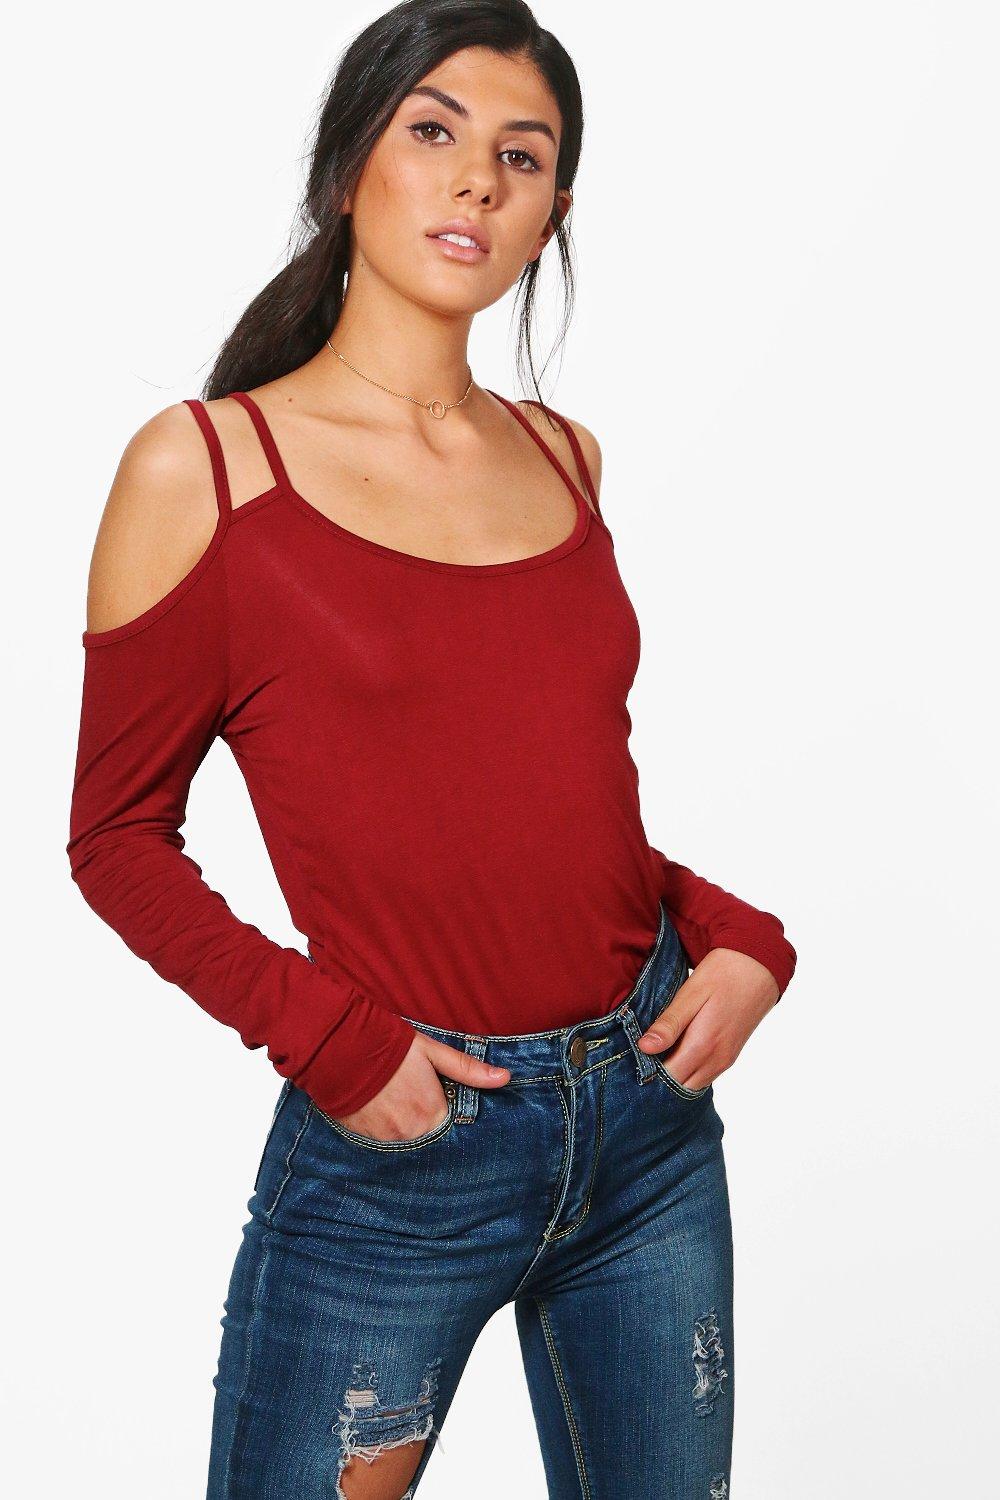 Boohoo Womens Mila Long Sleeve Cold Shoulder Strappy Top | eBay